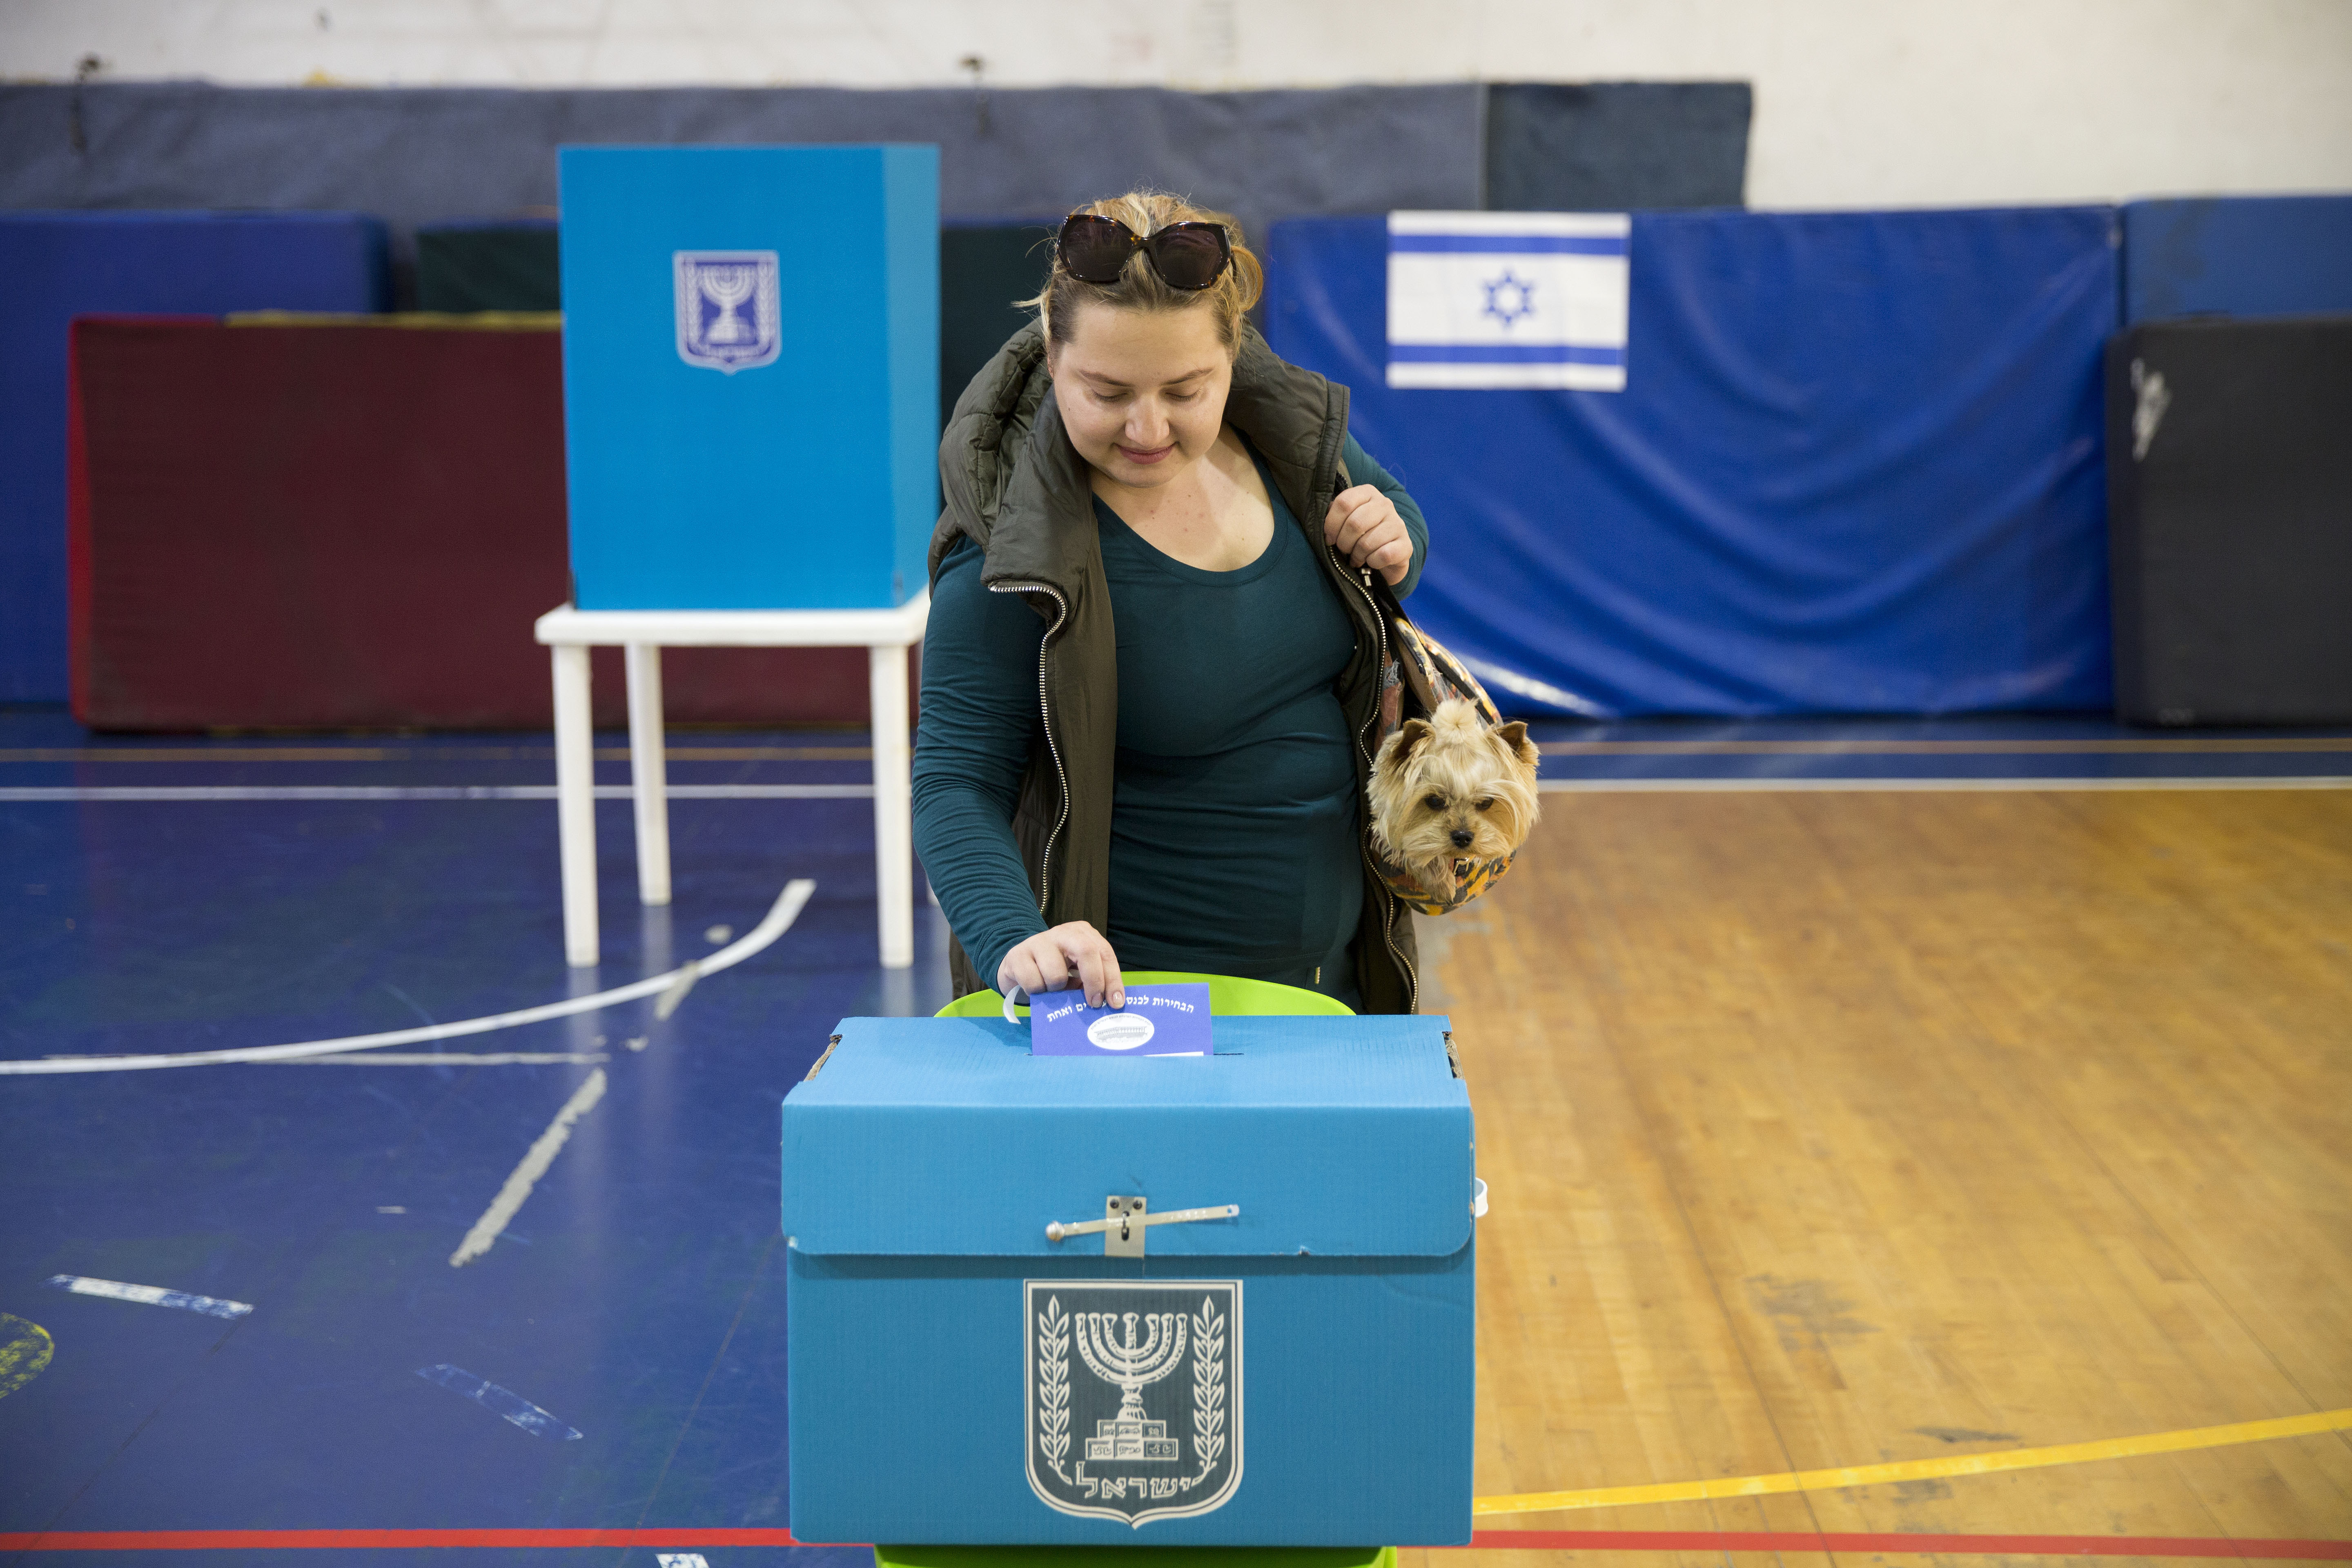 An Israeli woman casts her ballot for Israel's parliamentary election at a polling station in Ramat Gan, Israel, Tuesday, April 9, 2019. (AP Photo/Oded Balilty)